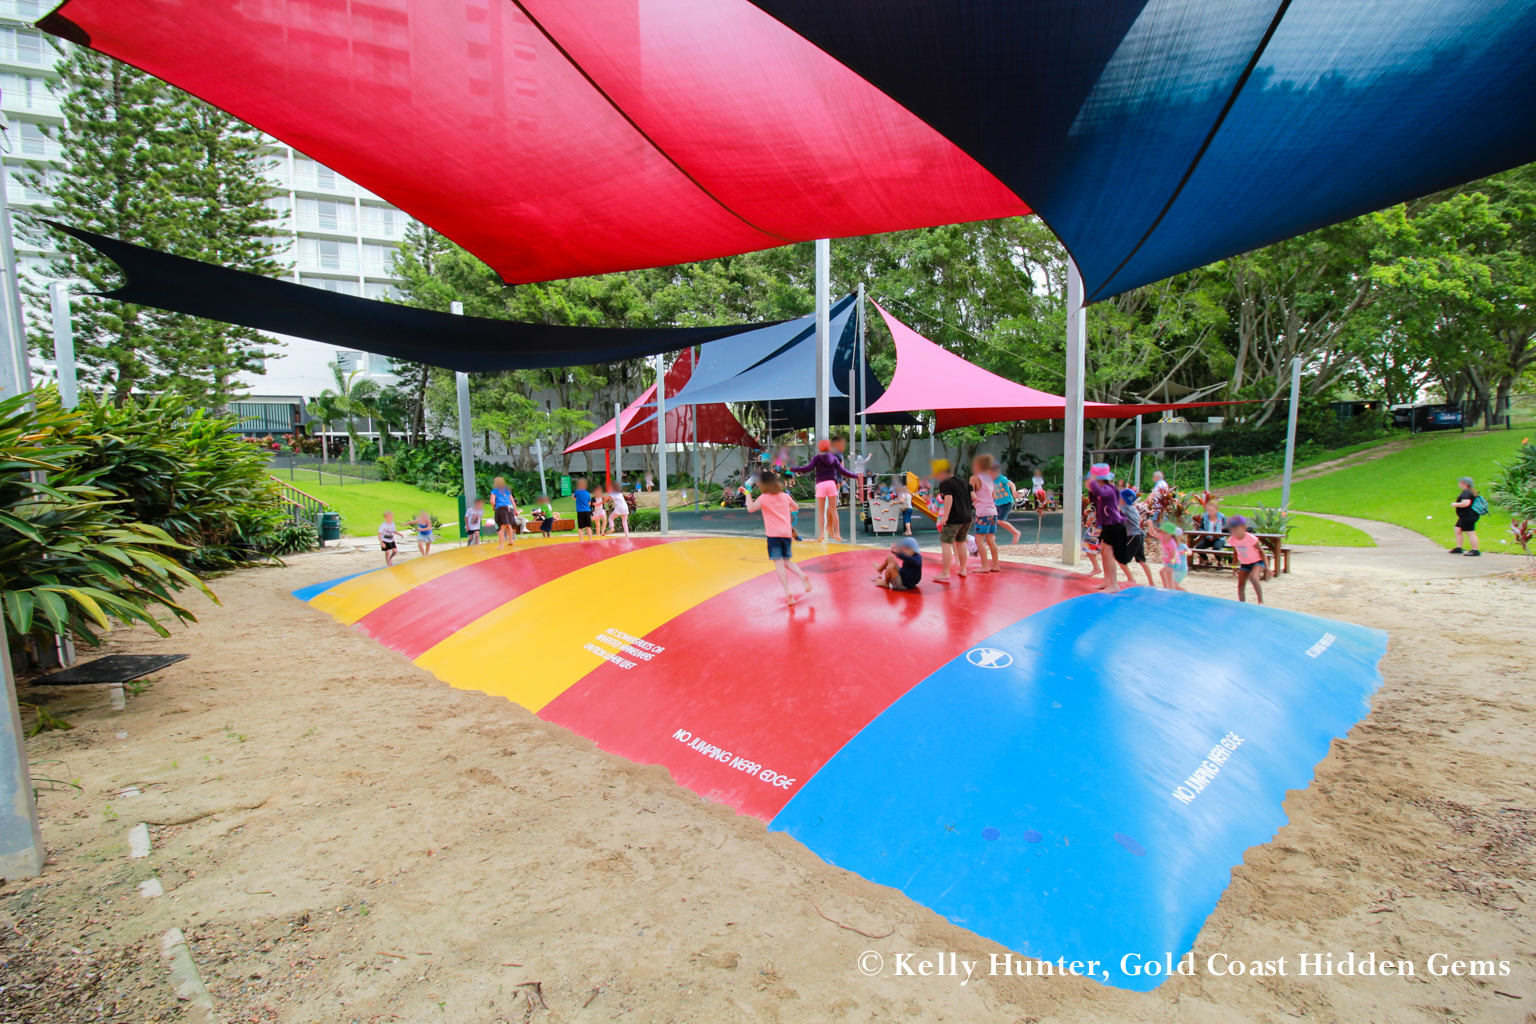 Royal Pines Public Playground for Kids